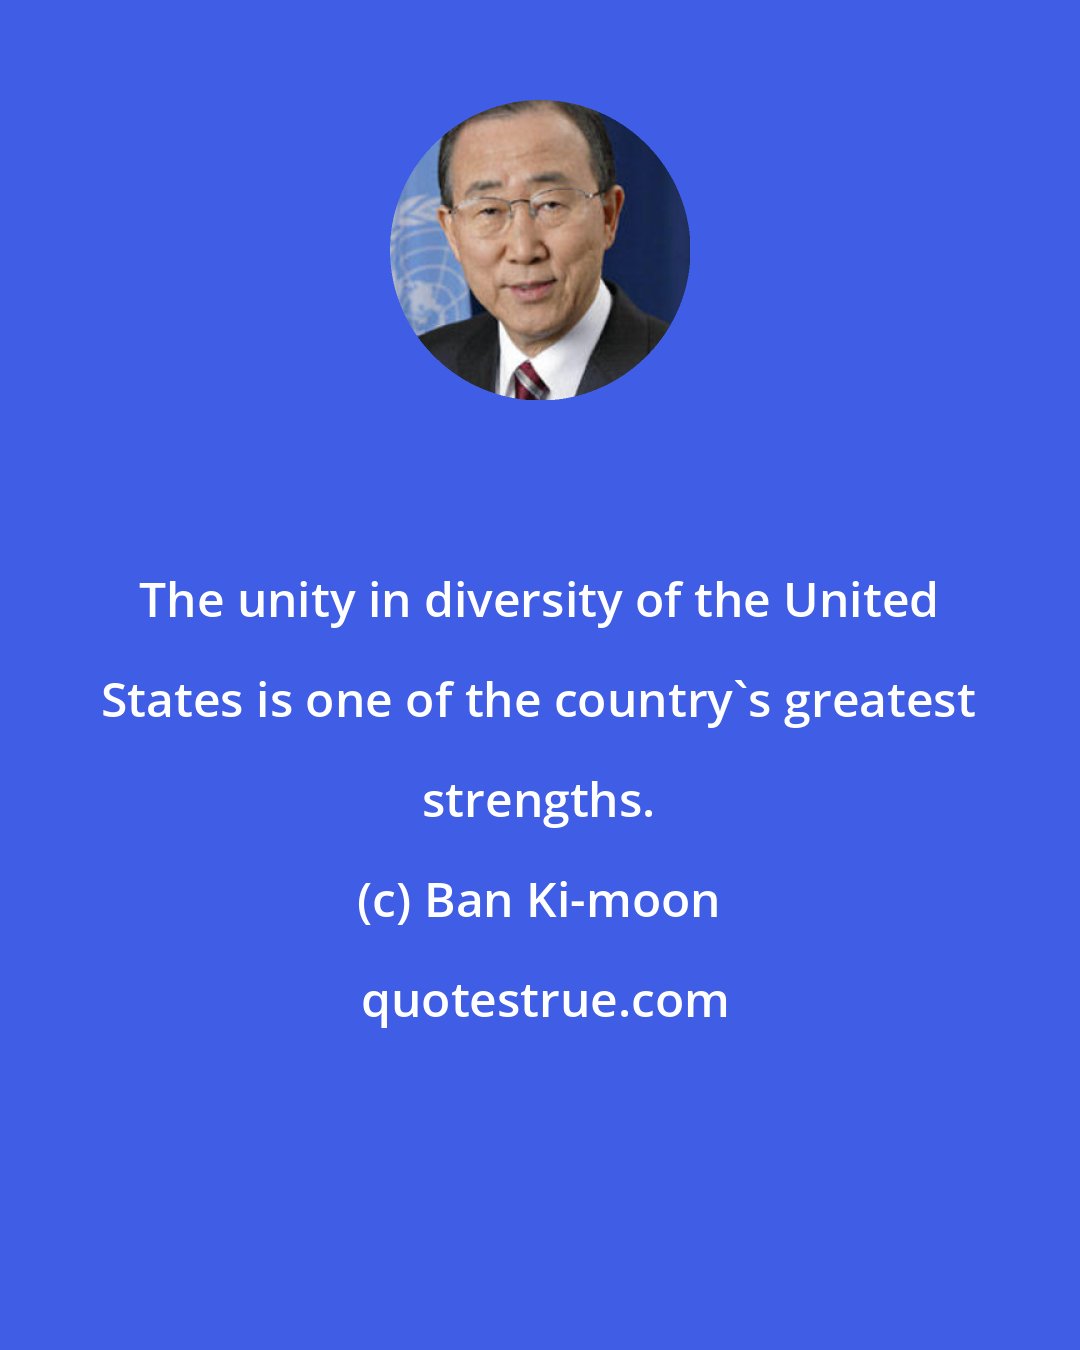 Ban Ki-moon: The unity in diversity of the United States is one of the country's greatest strengths.